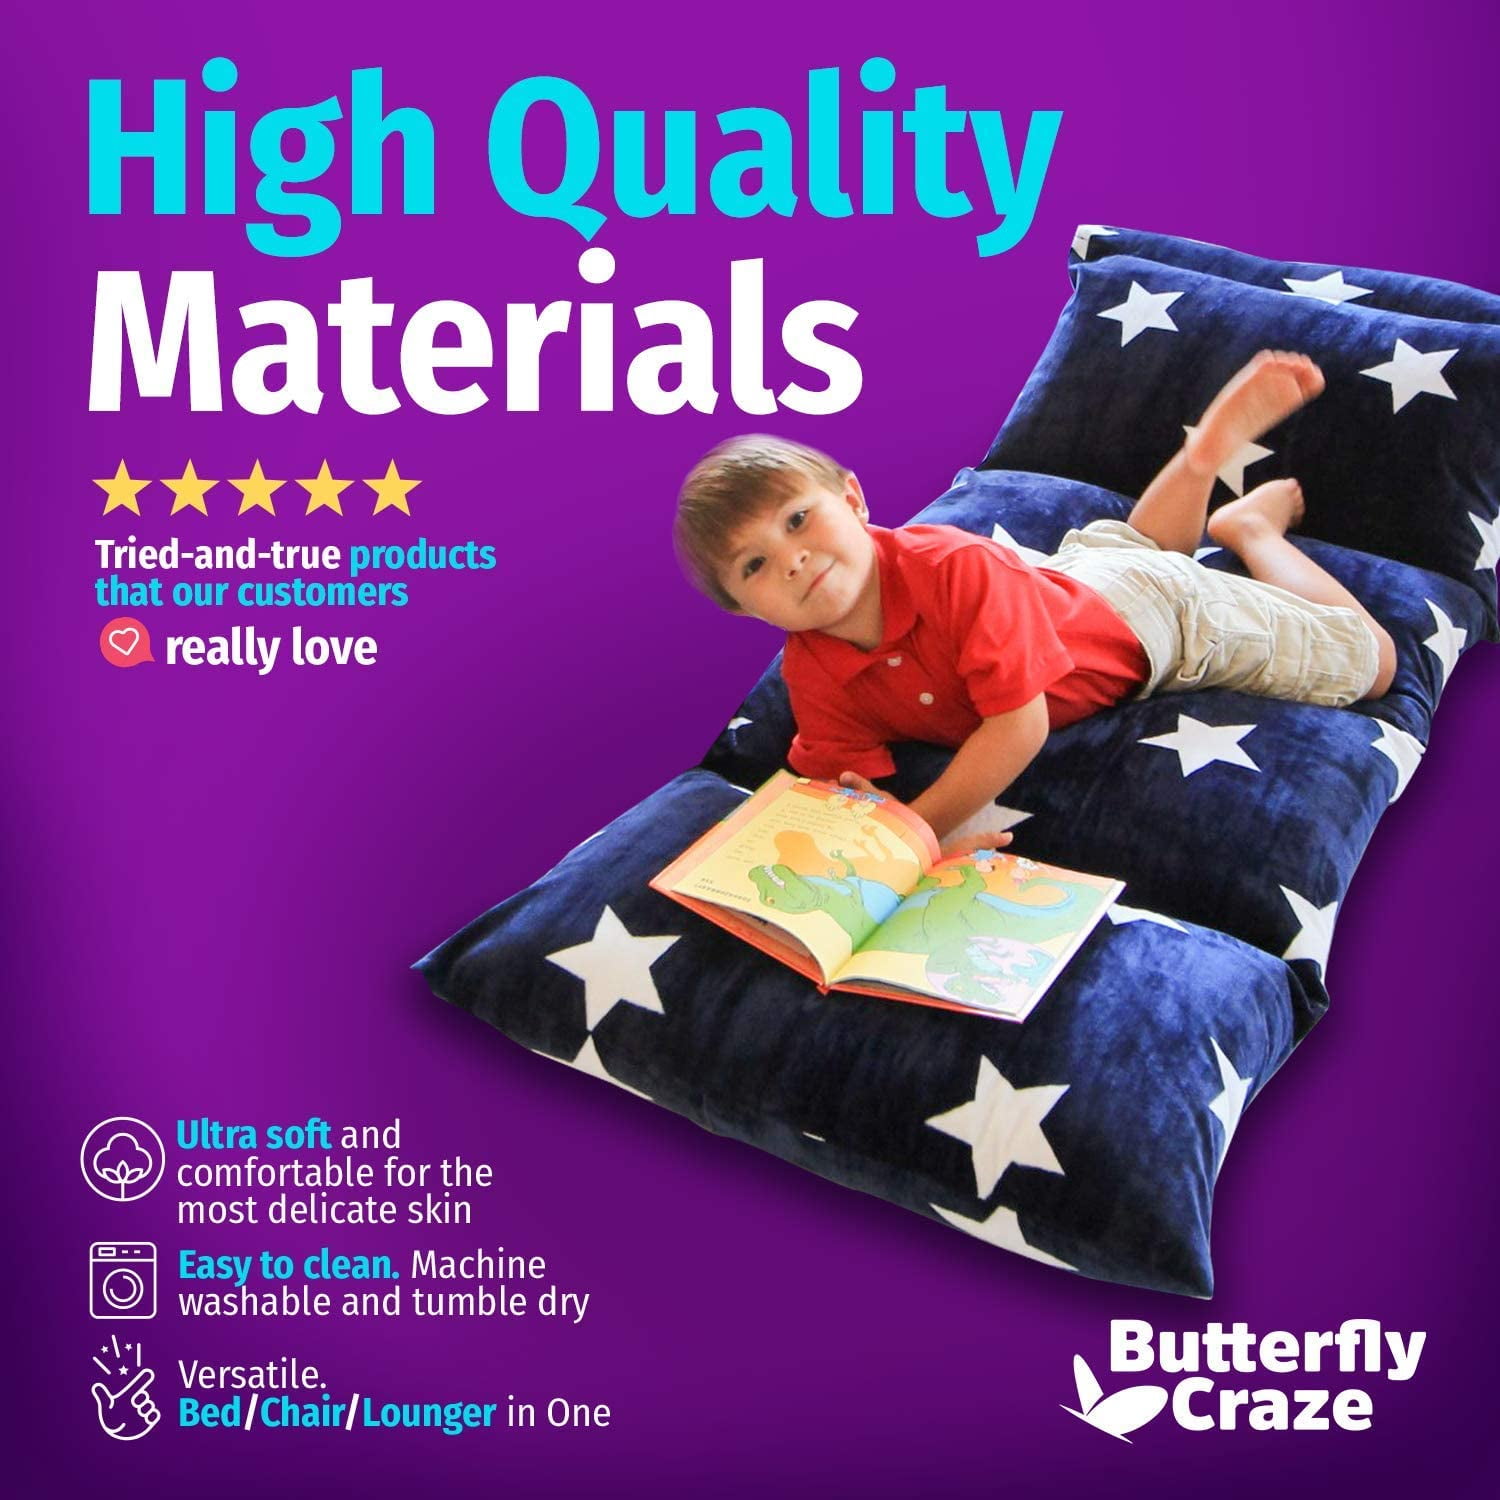 NAVY WITH STARS KIDS' PILLOW BED COVER FLOOR PILLOW LOUNGER COVER 